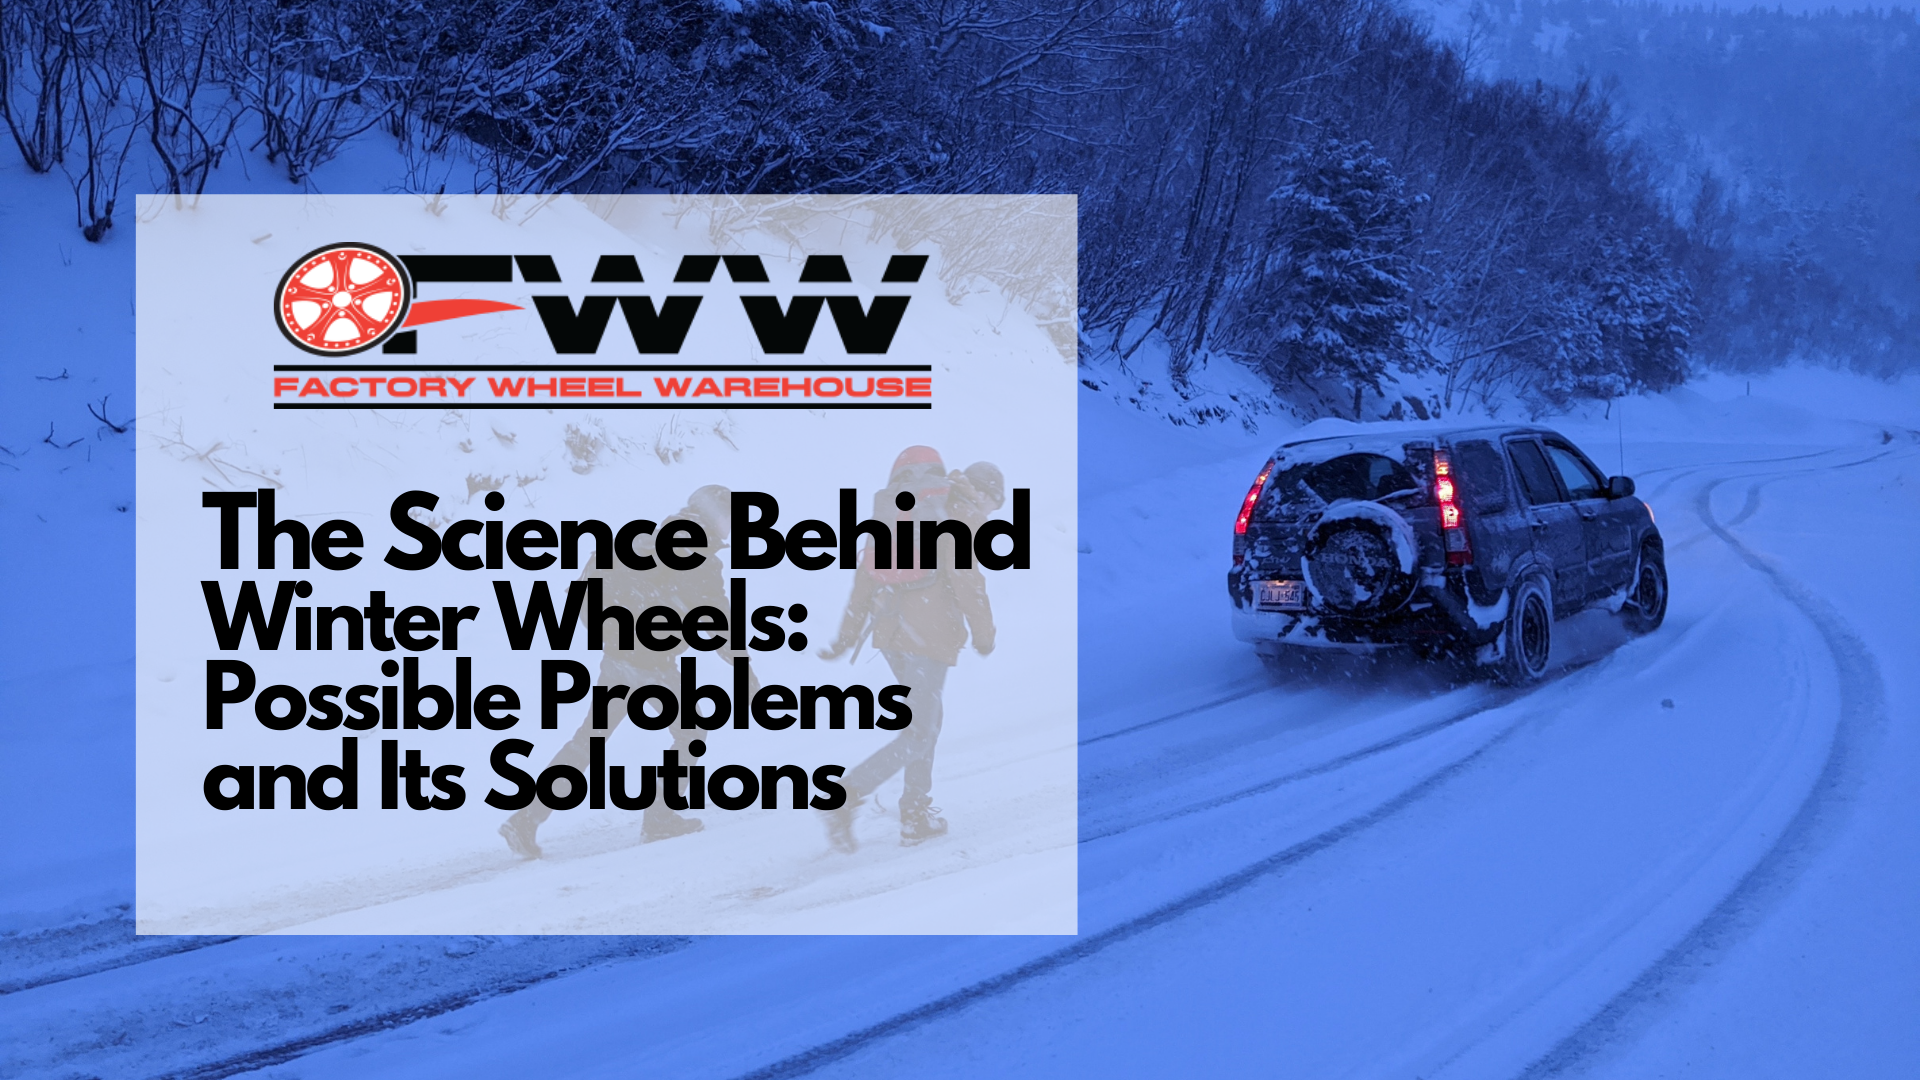 The Science Behind Winter Wheels: Possible Problems and Its Solutions